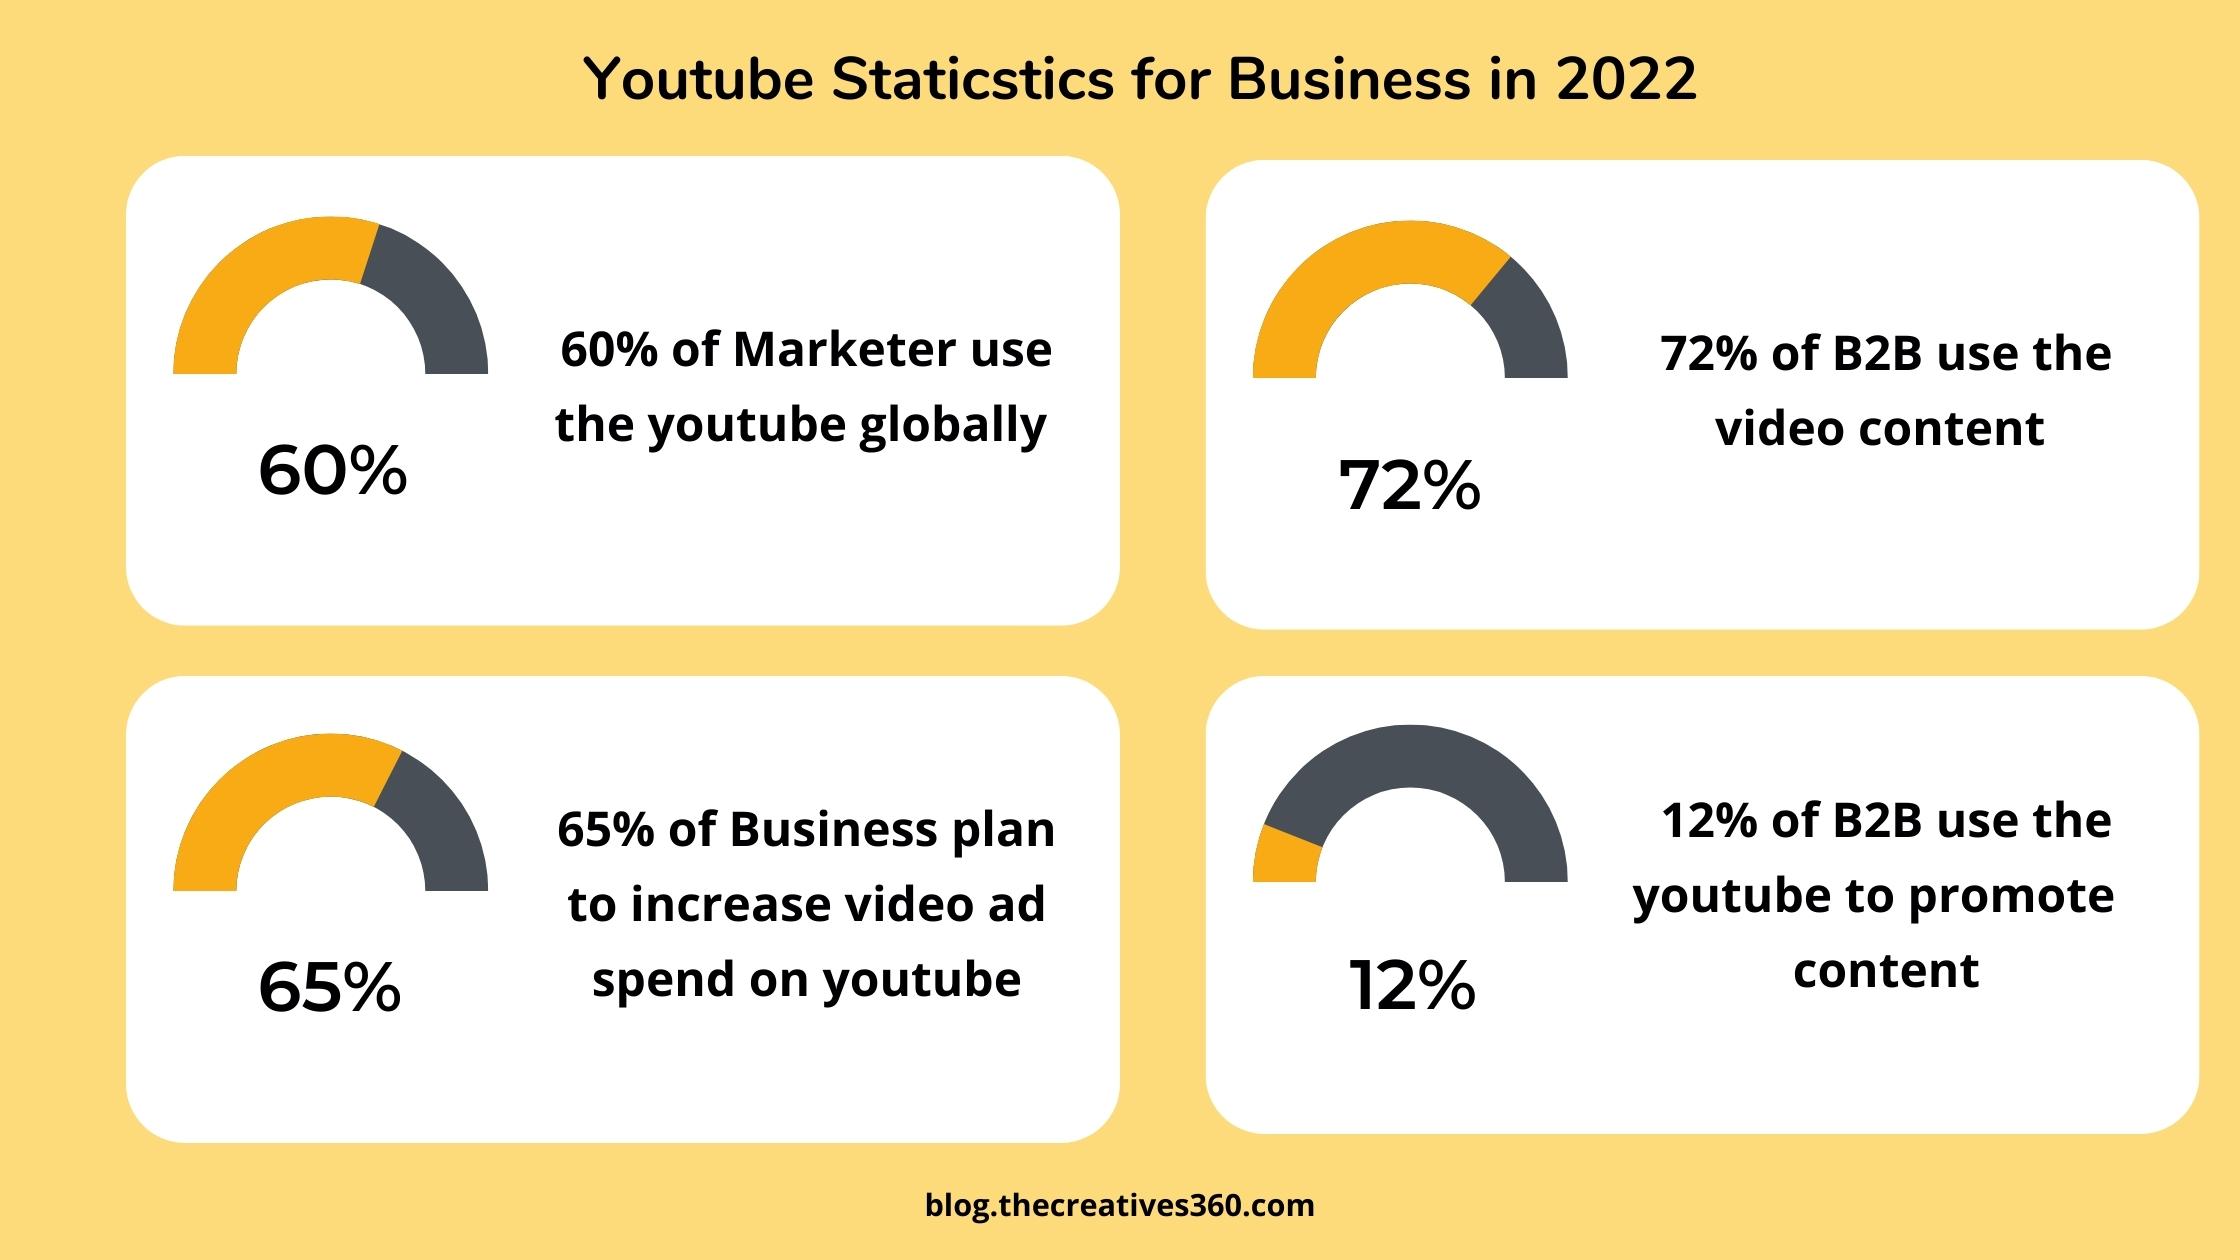 How to use YouTube successfully for business